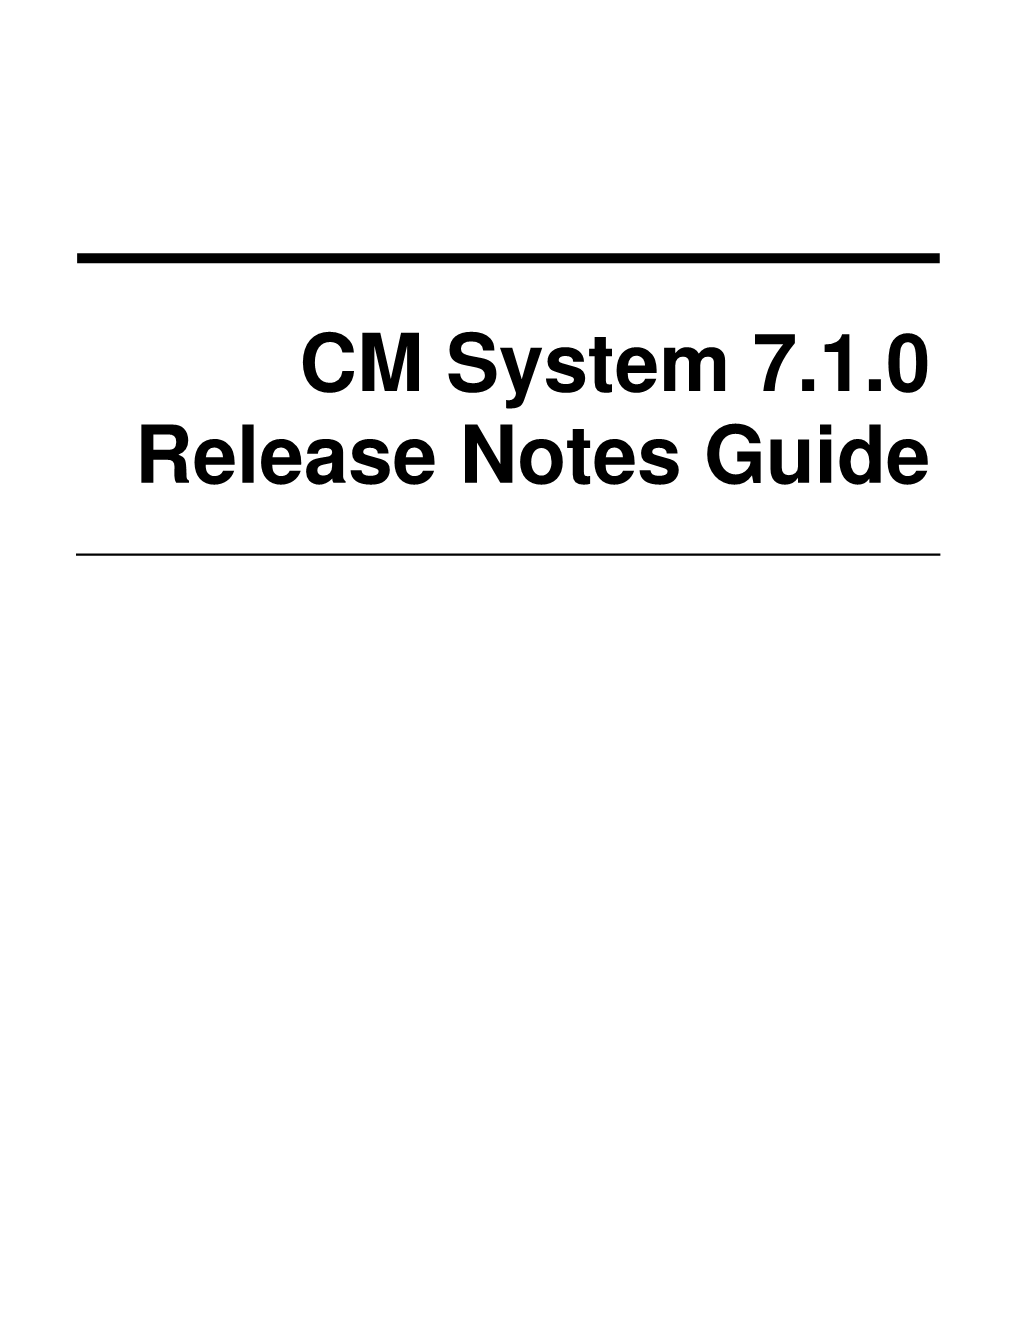 CM System 7.1.0 Release Notes Guide